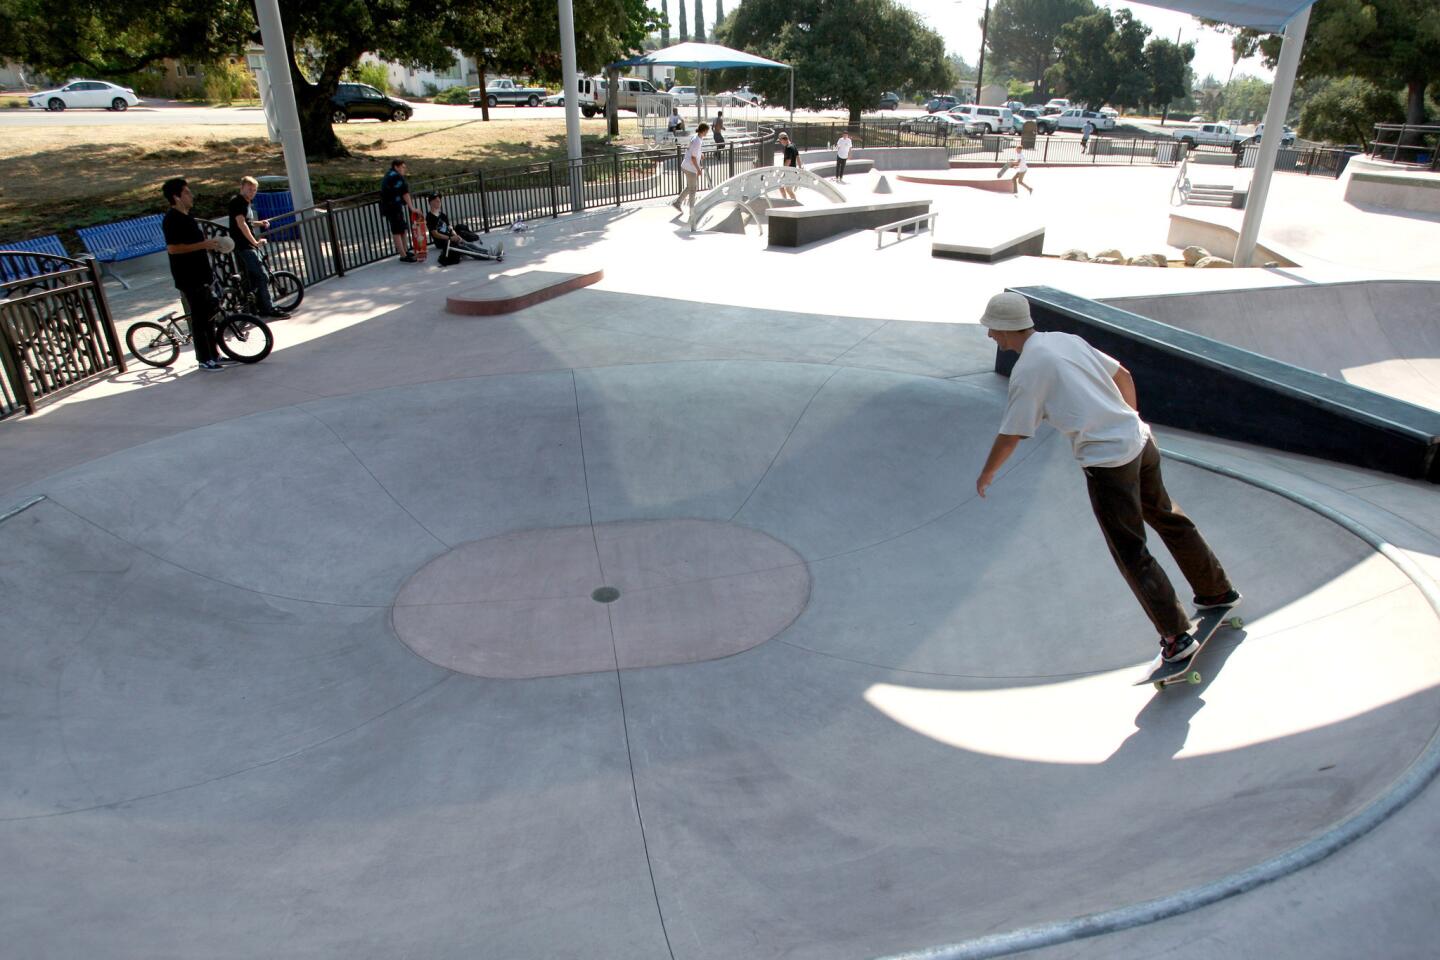 The new skate park at Crescenta Valley Park is now open and being used by many on Wednesday, June 29, 2016.